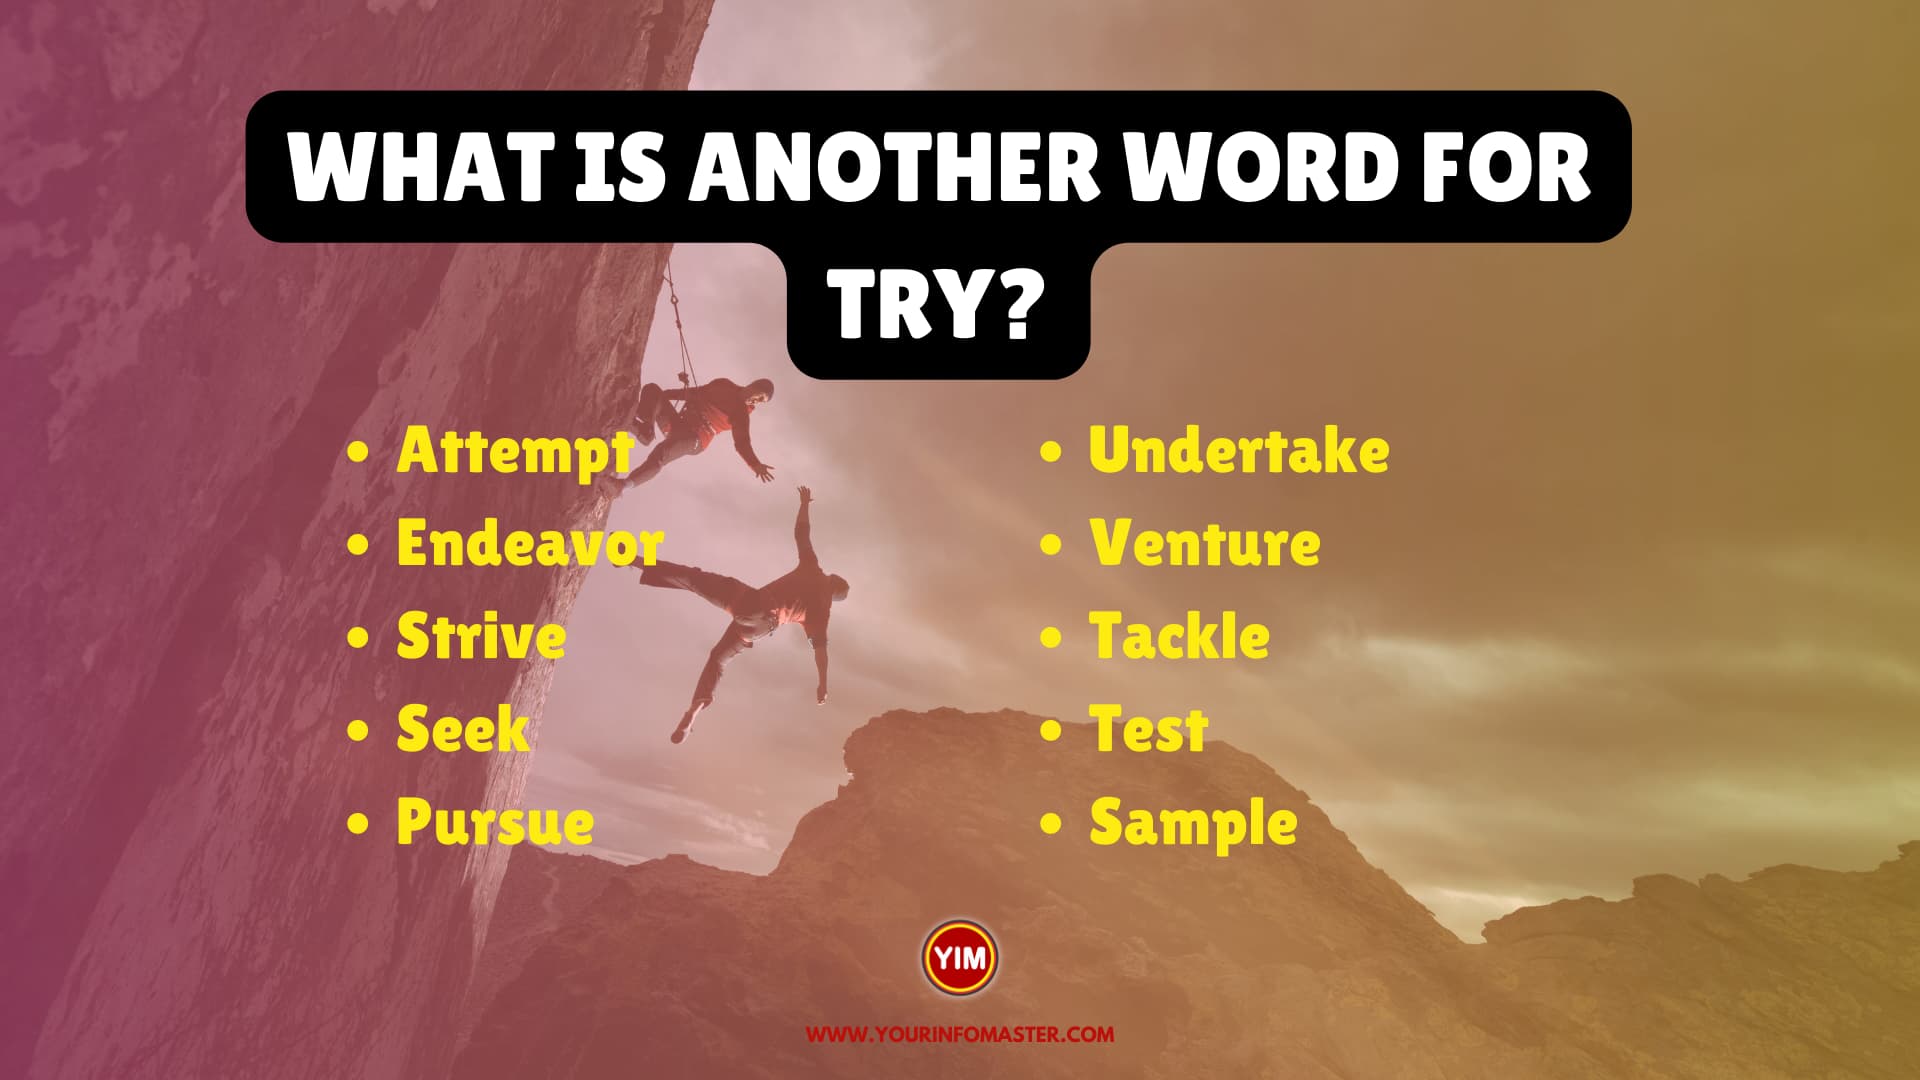 What is another word for Try